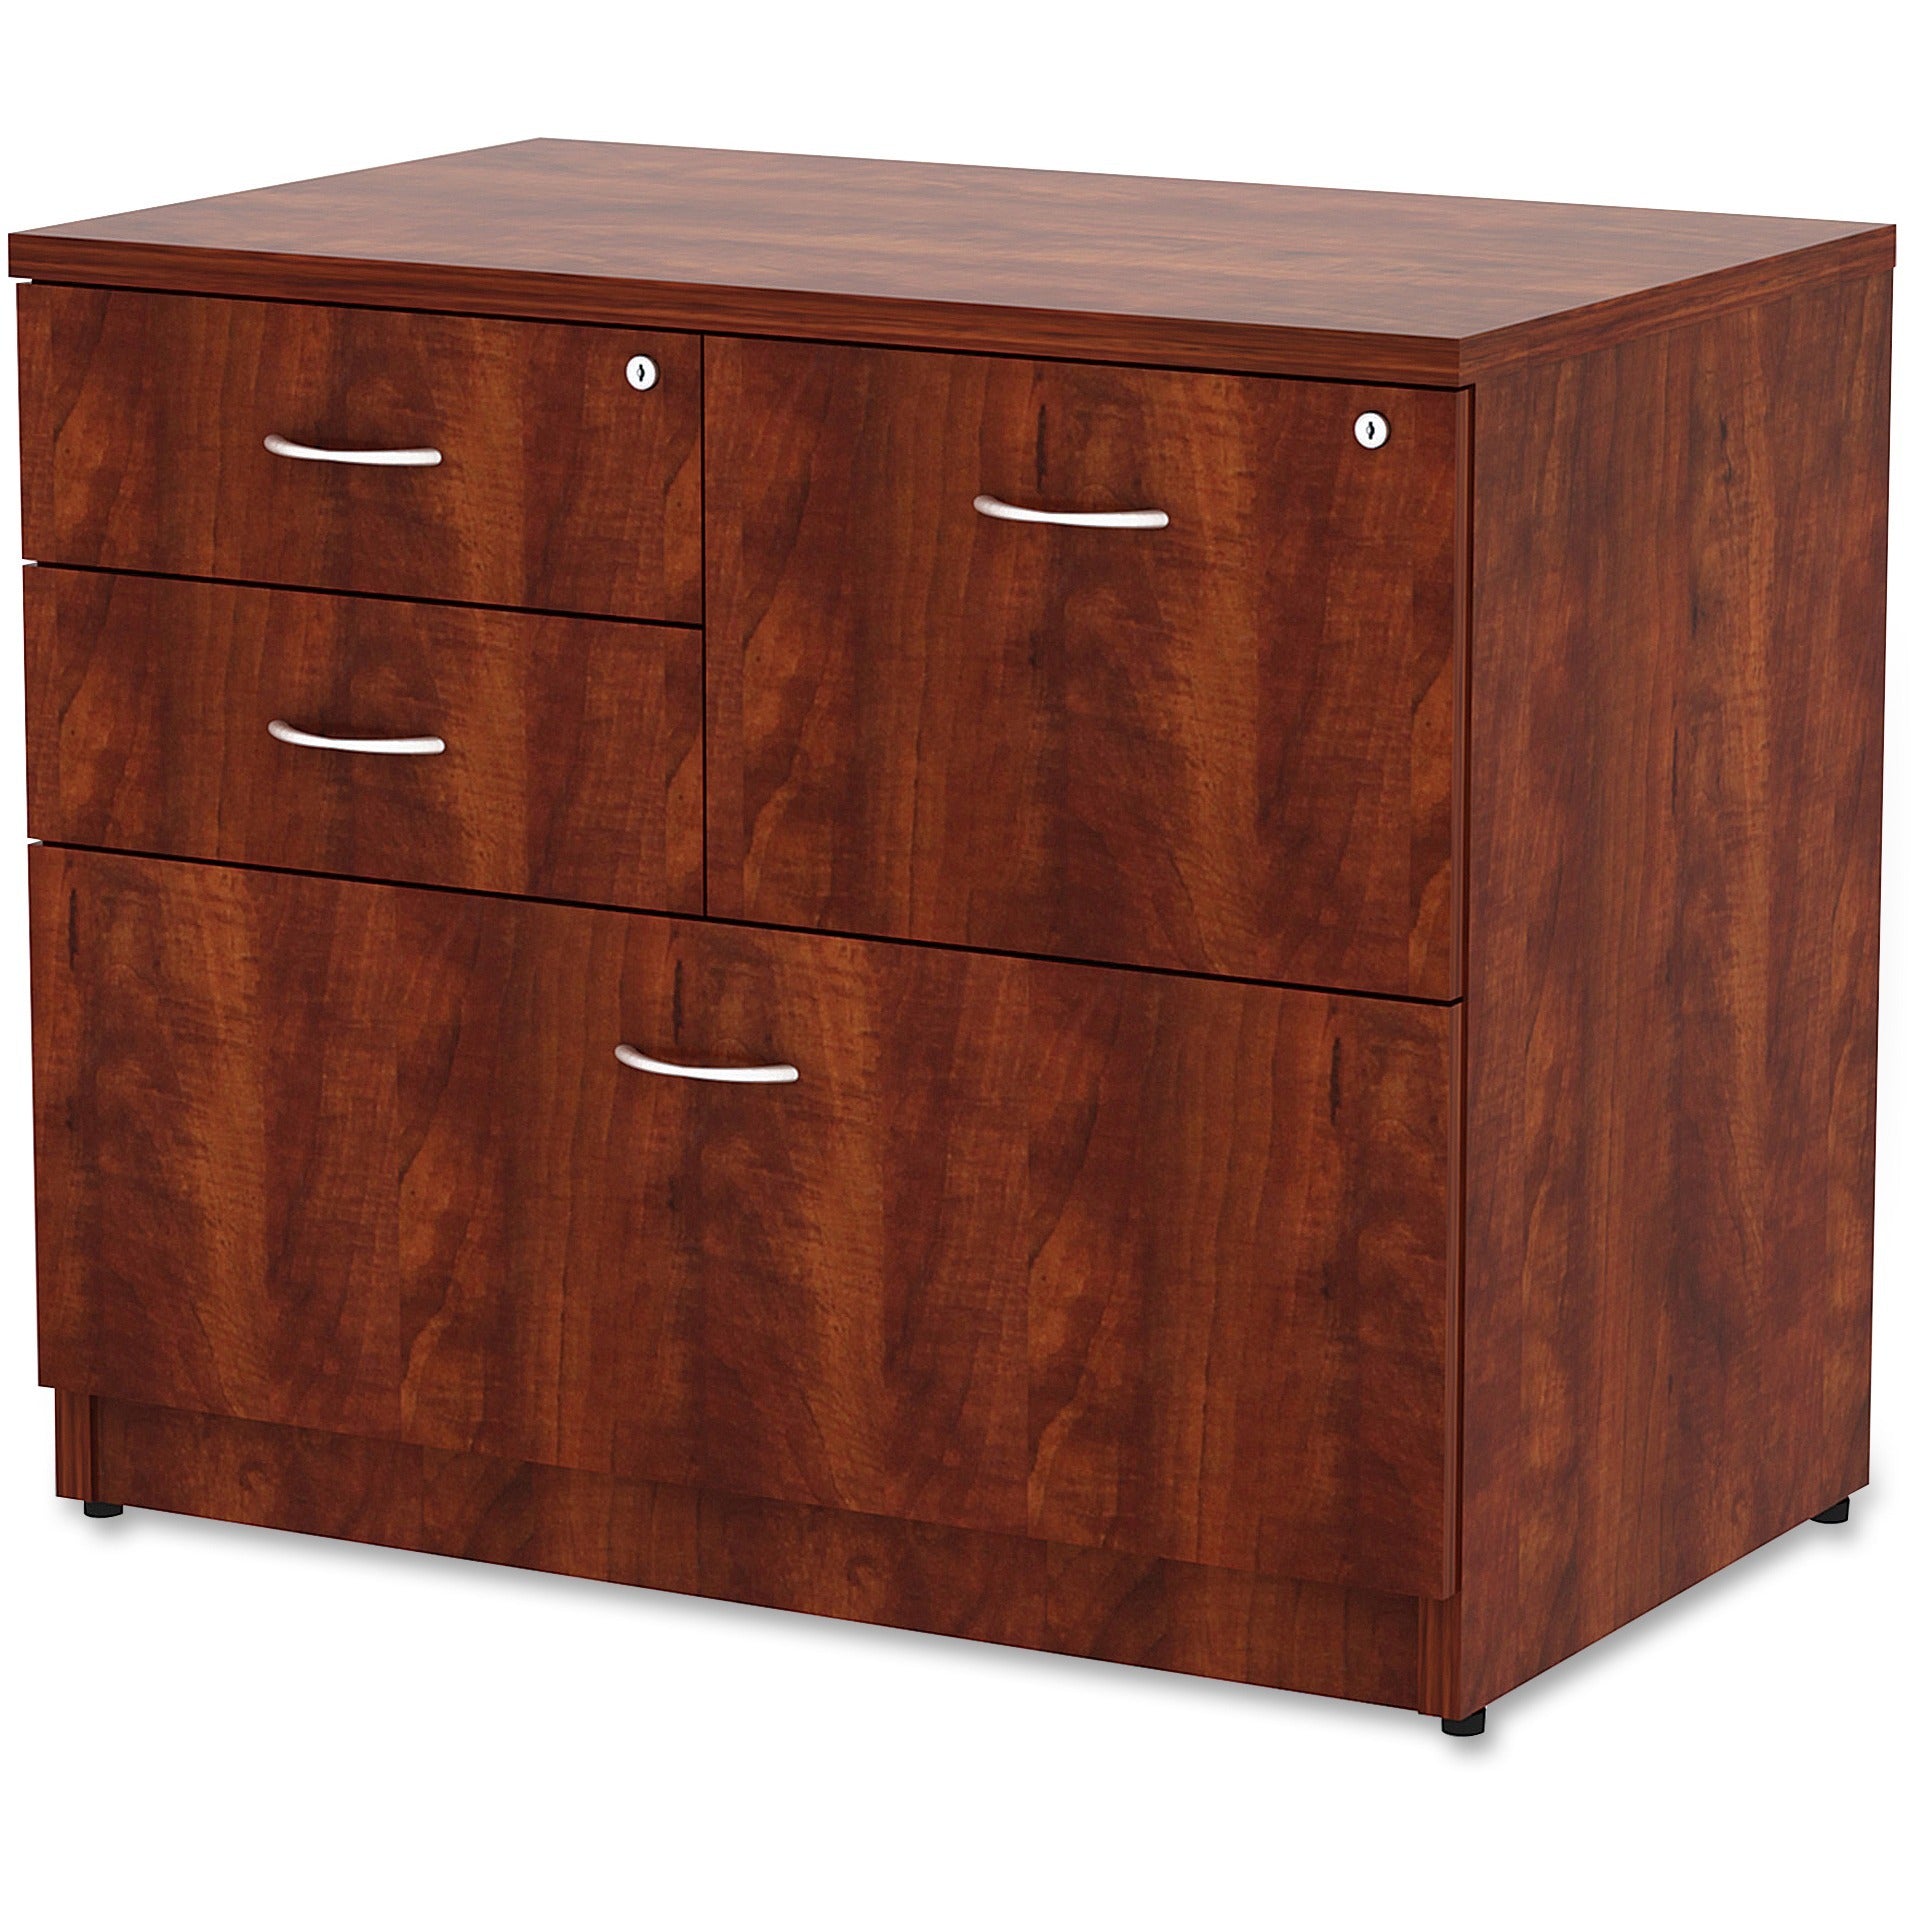 lorell-essentials-series-box-box-file-lateral-file-1-side-panel-01-edge-355-x-22295-lateral-file-4-x-box-file-drawers-cherry-laminate-table-top-versatile-ball-bearing-glide-drawer-extension-security-lock-durable-adjustable-l_llr69540 - 3